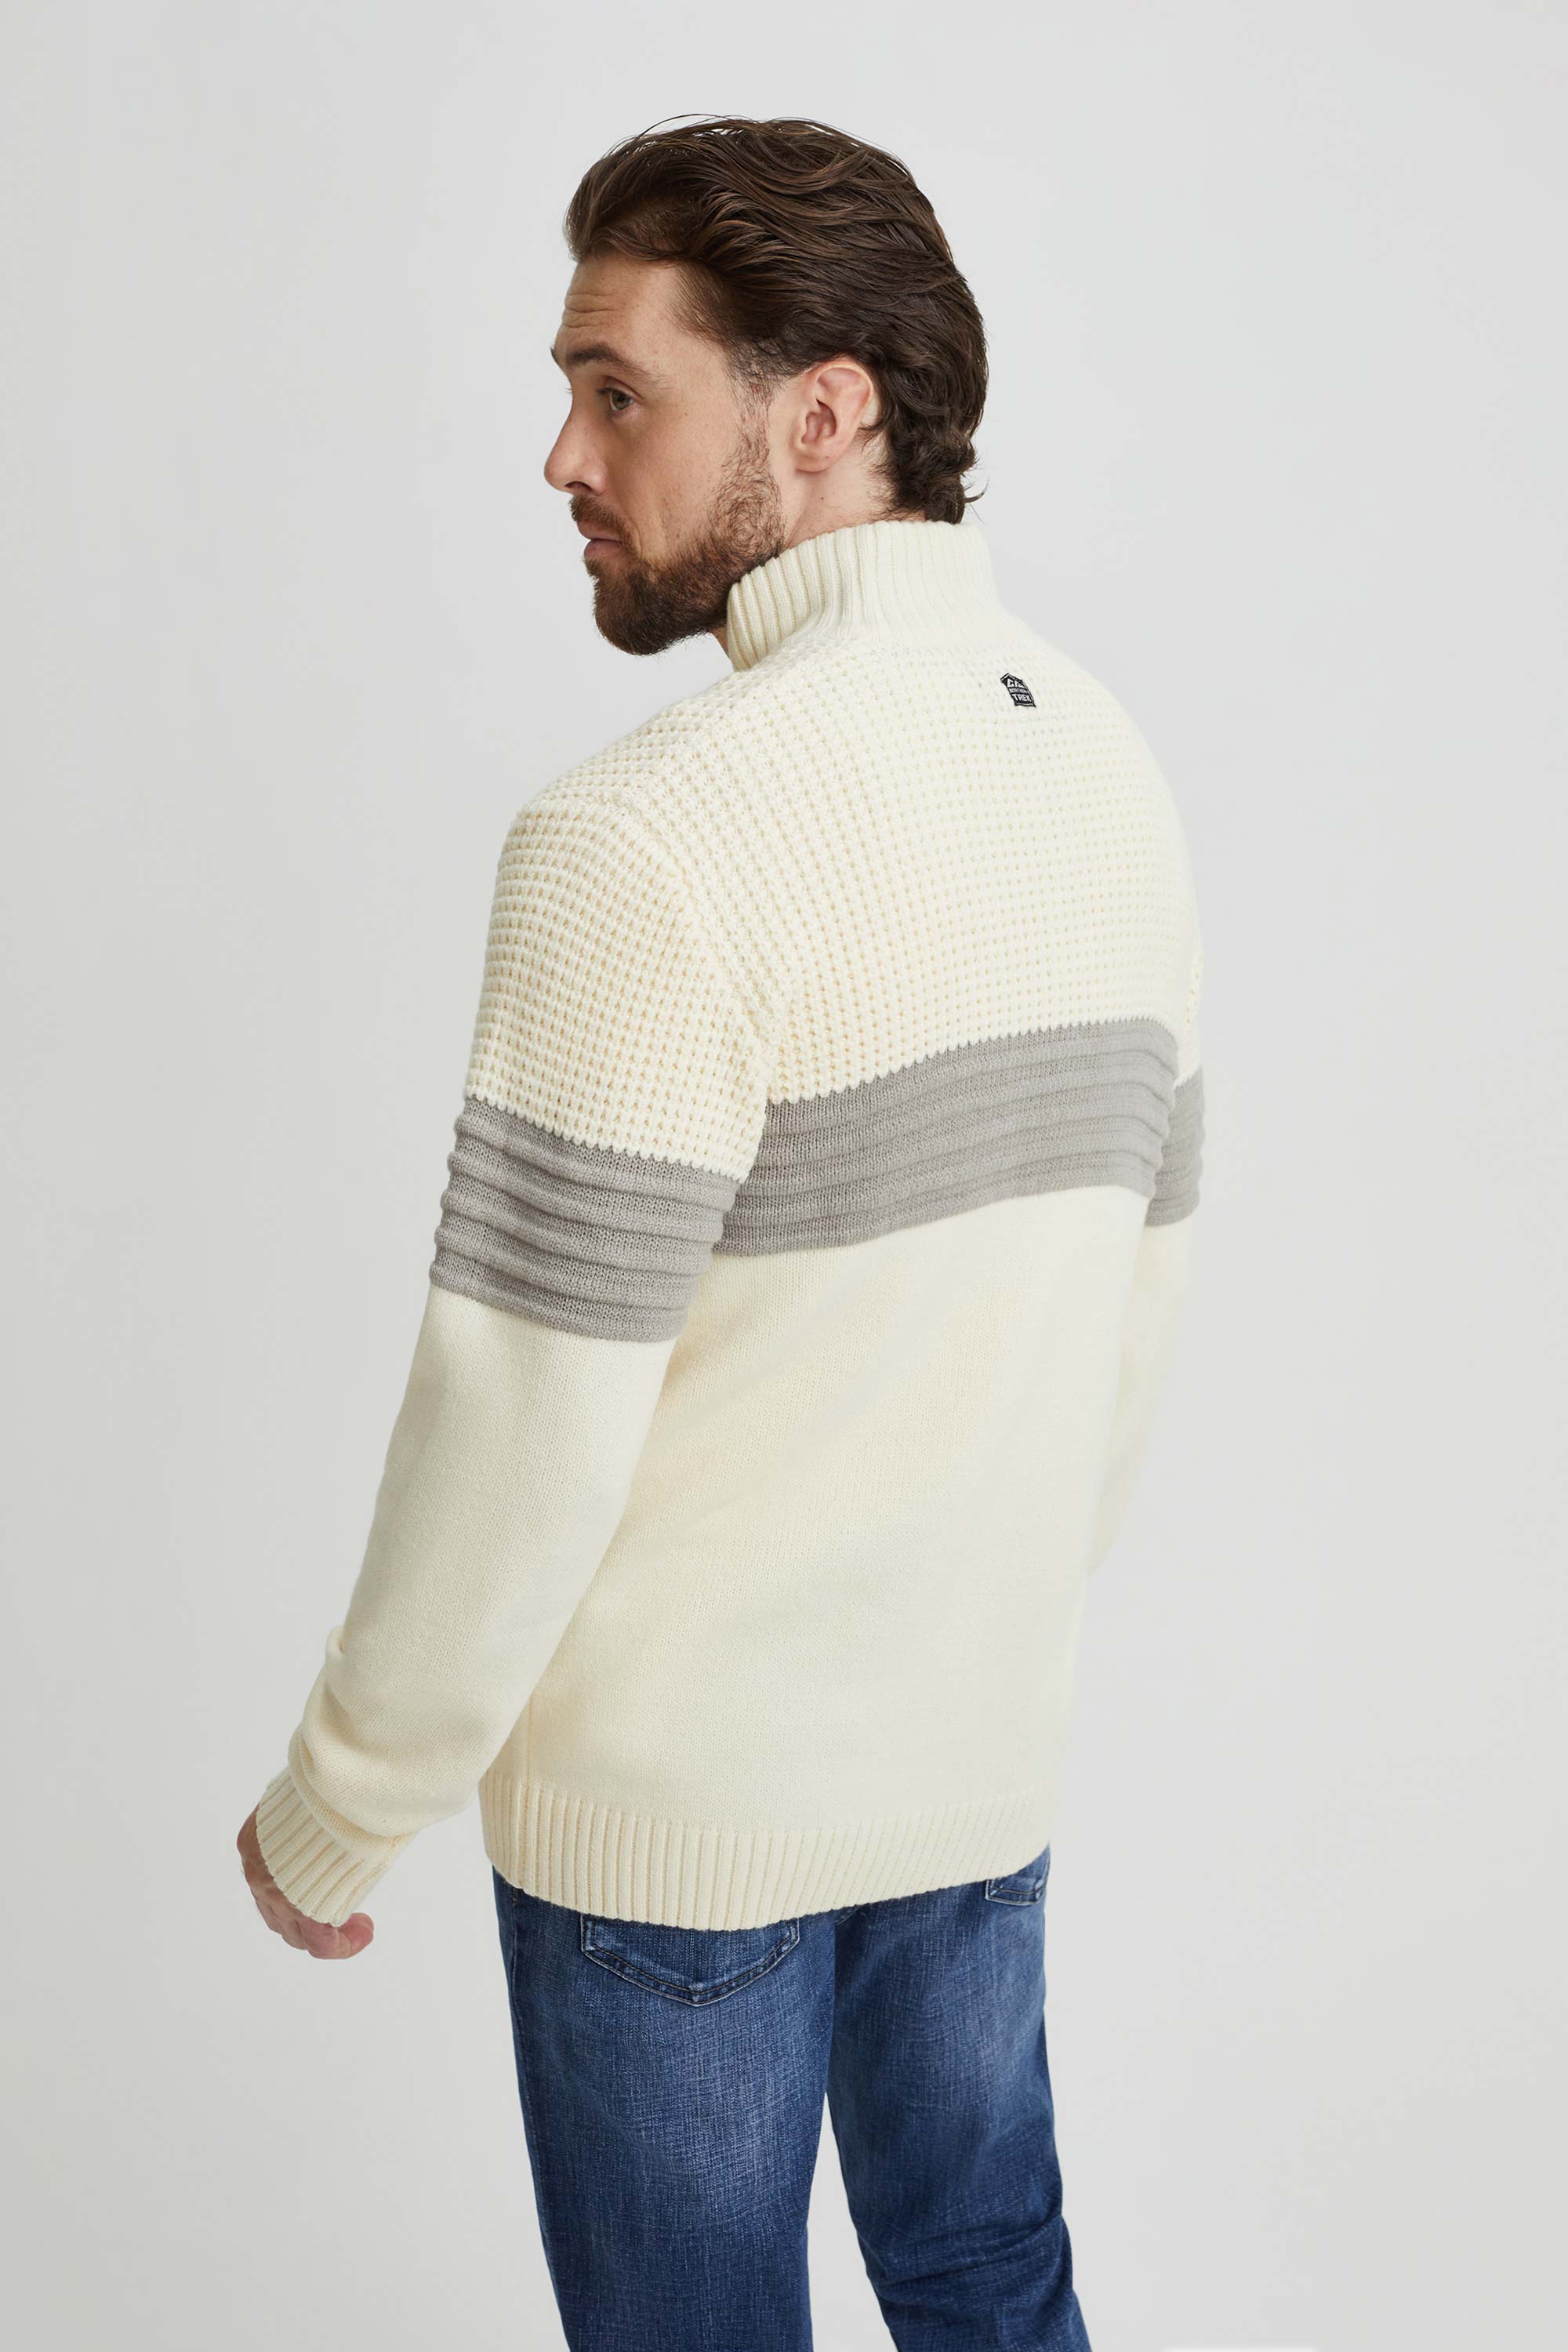 Textured knit with a high collar